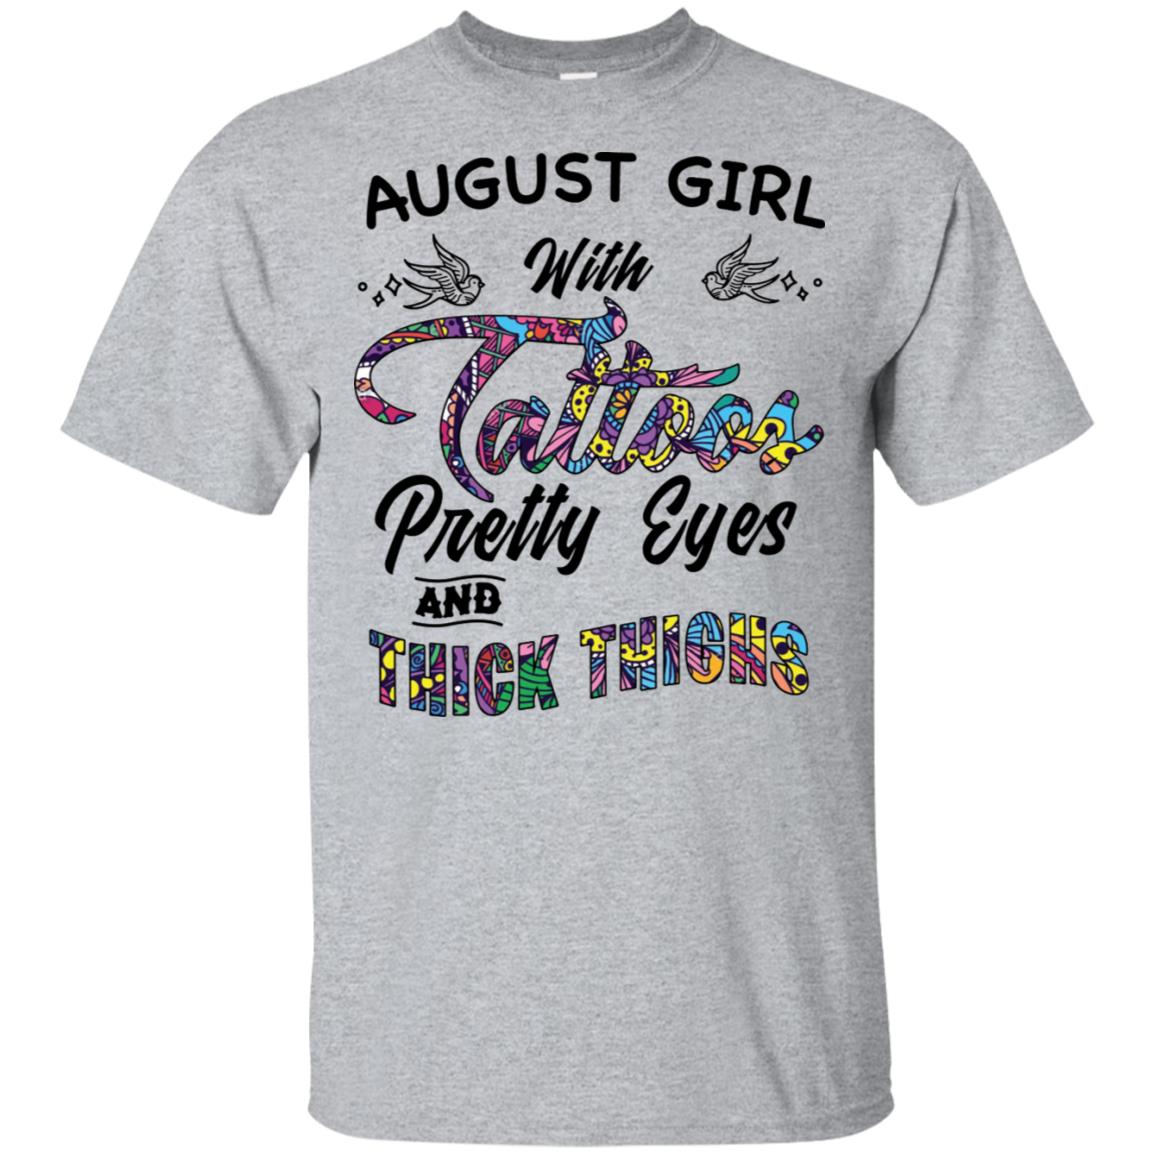 August Girl With Tattoos Pretty and Eyes Thick Thighs Shirt, Hoodie